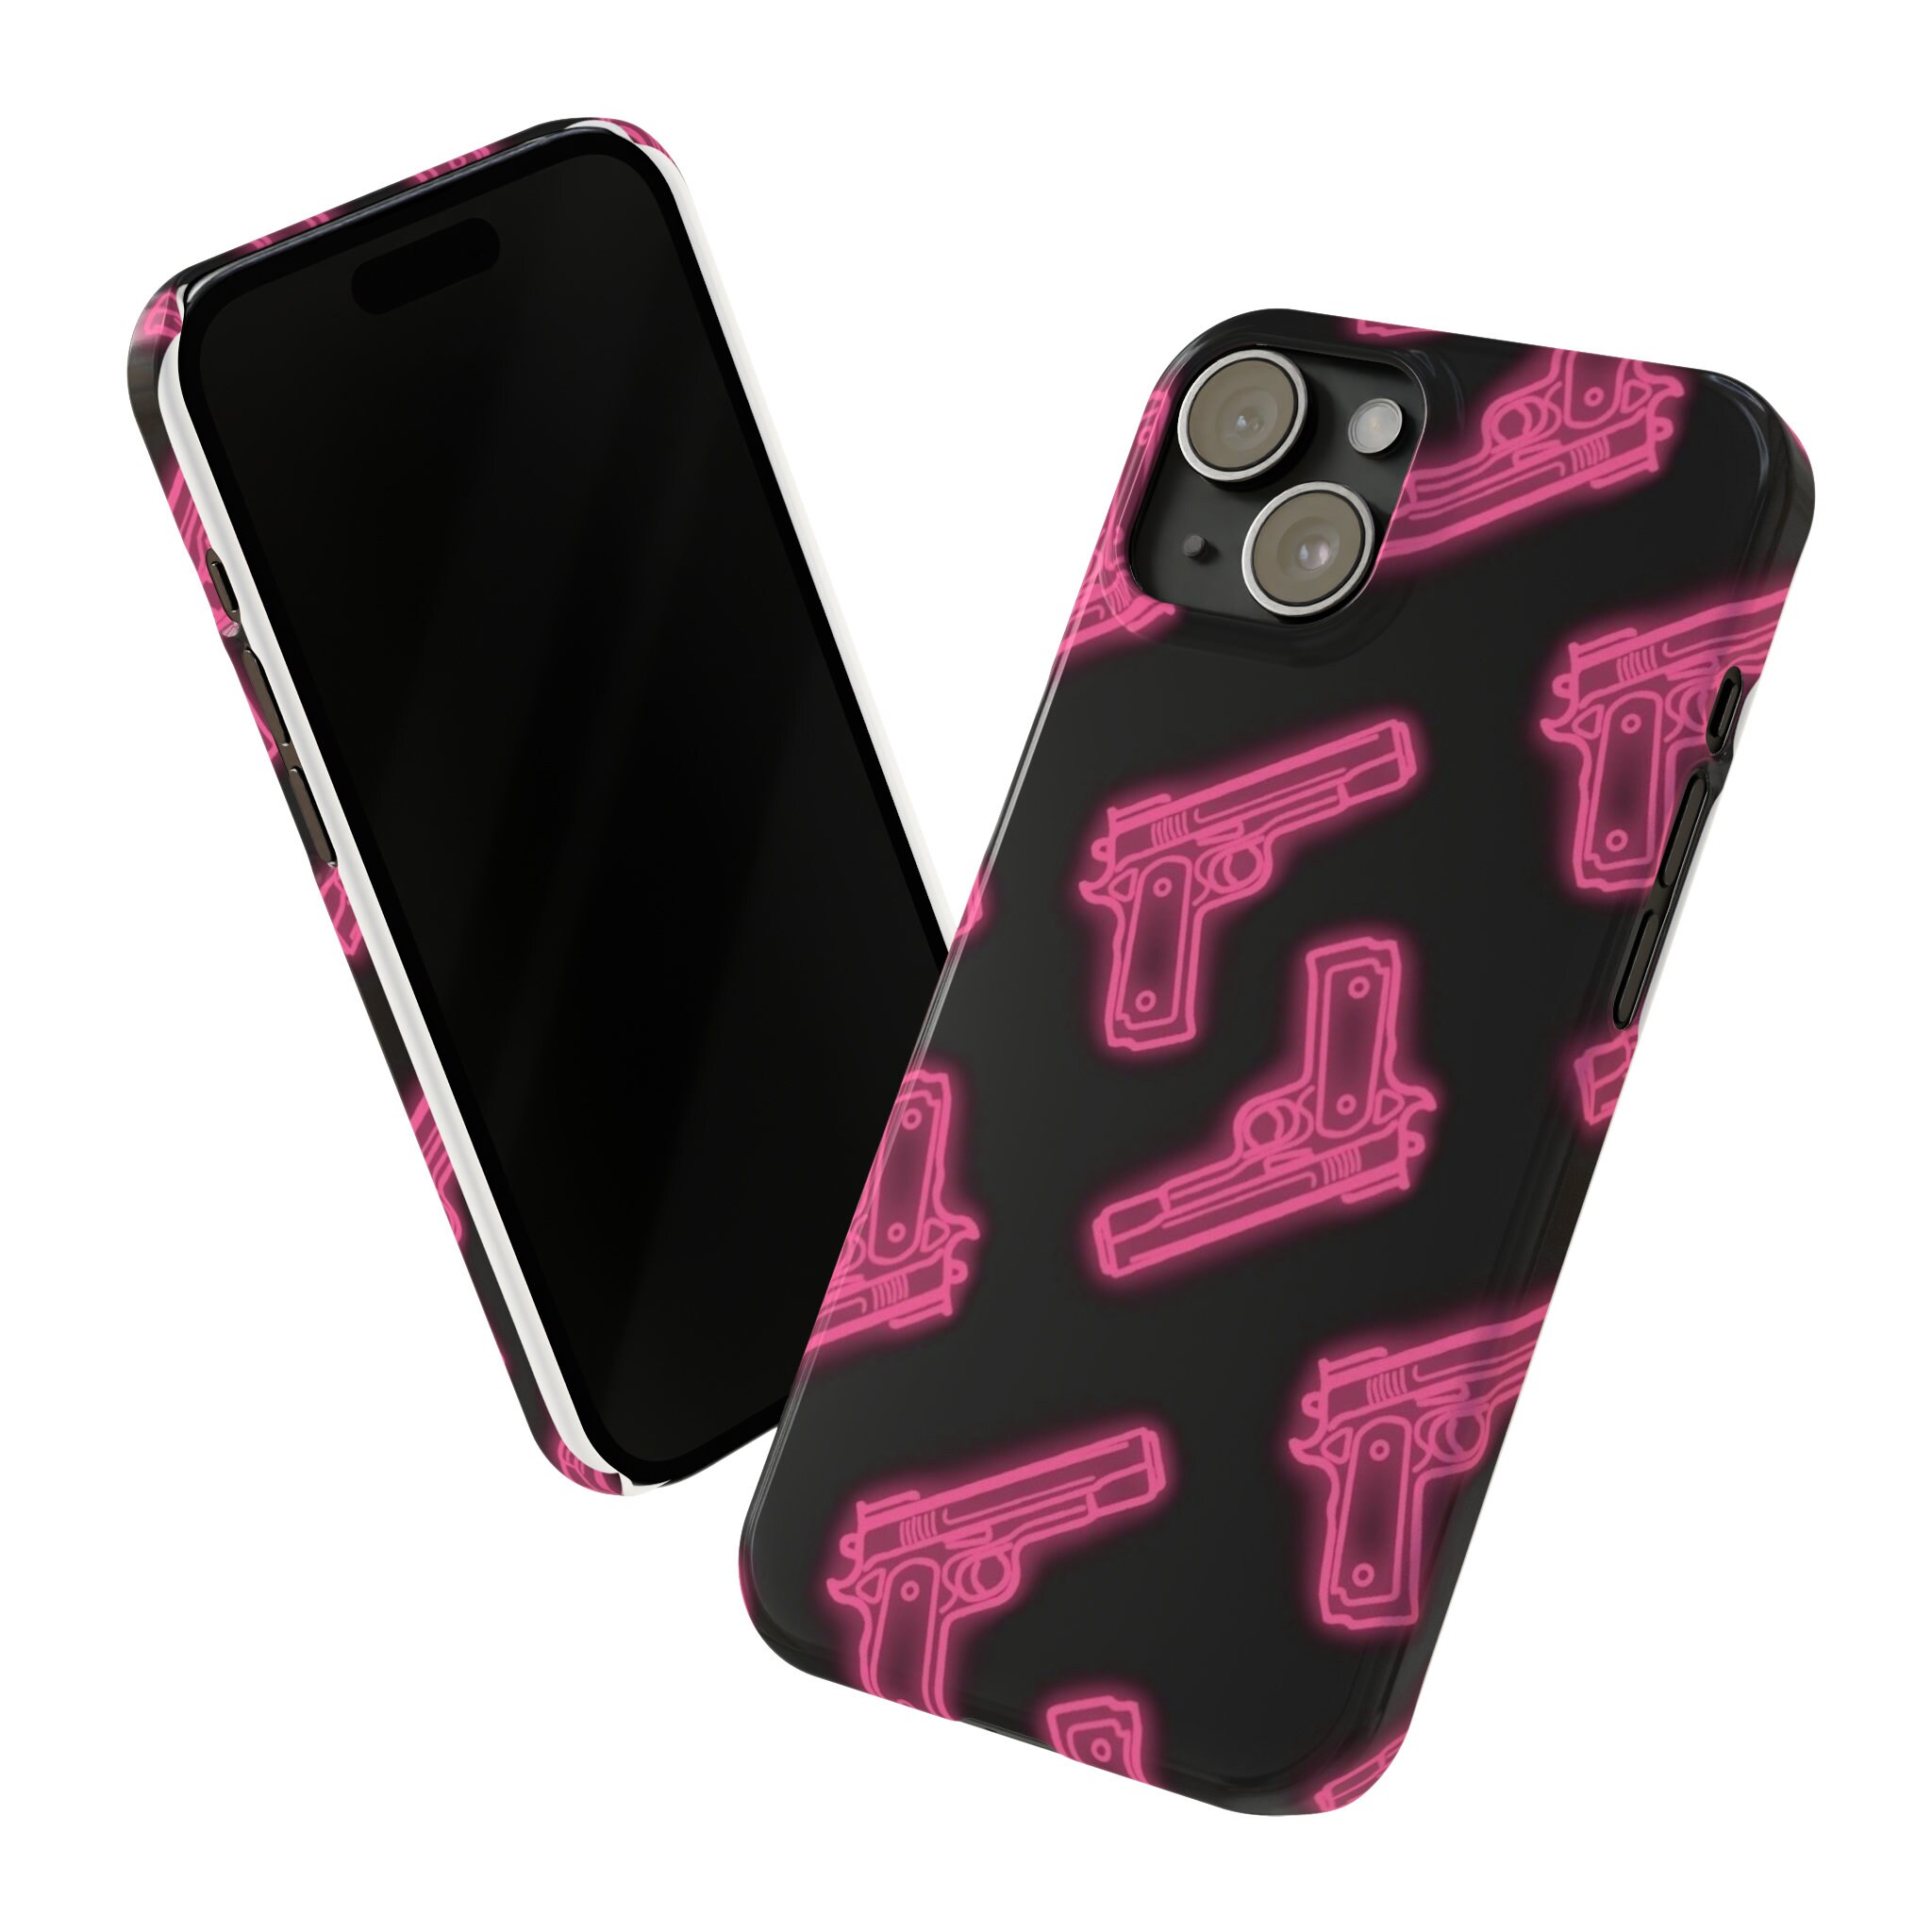 Accountant Barbie Phone Case CPA iPhone Cases Black Pink Fun Feminist Gifts